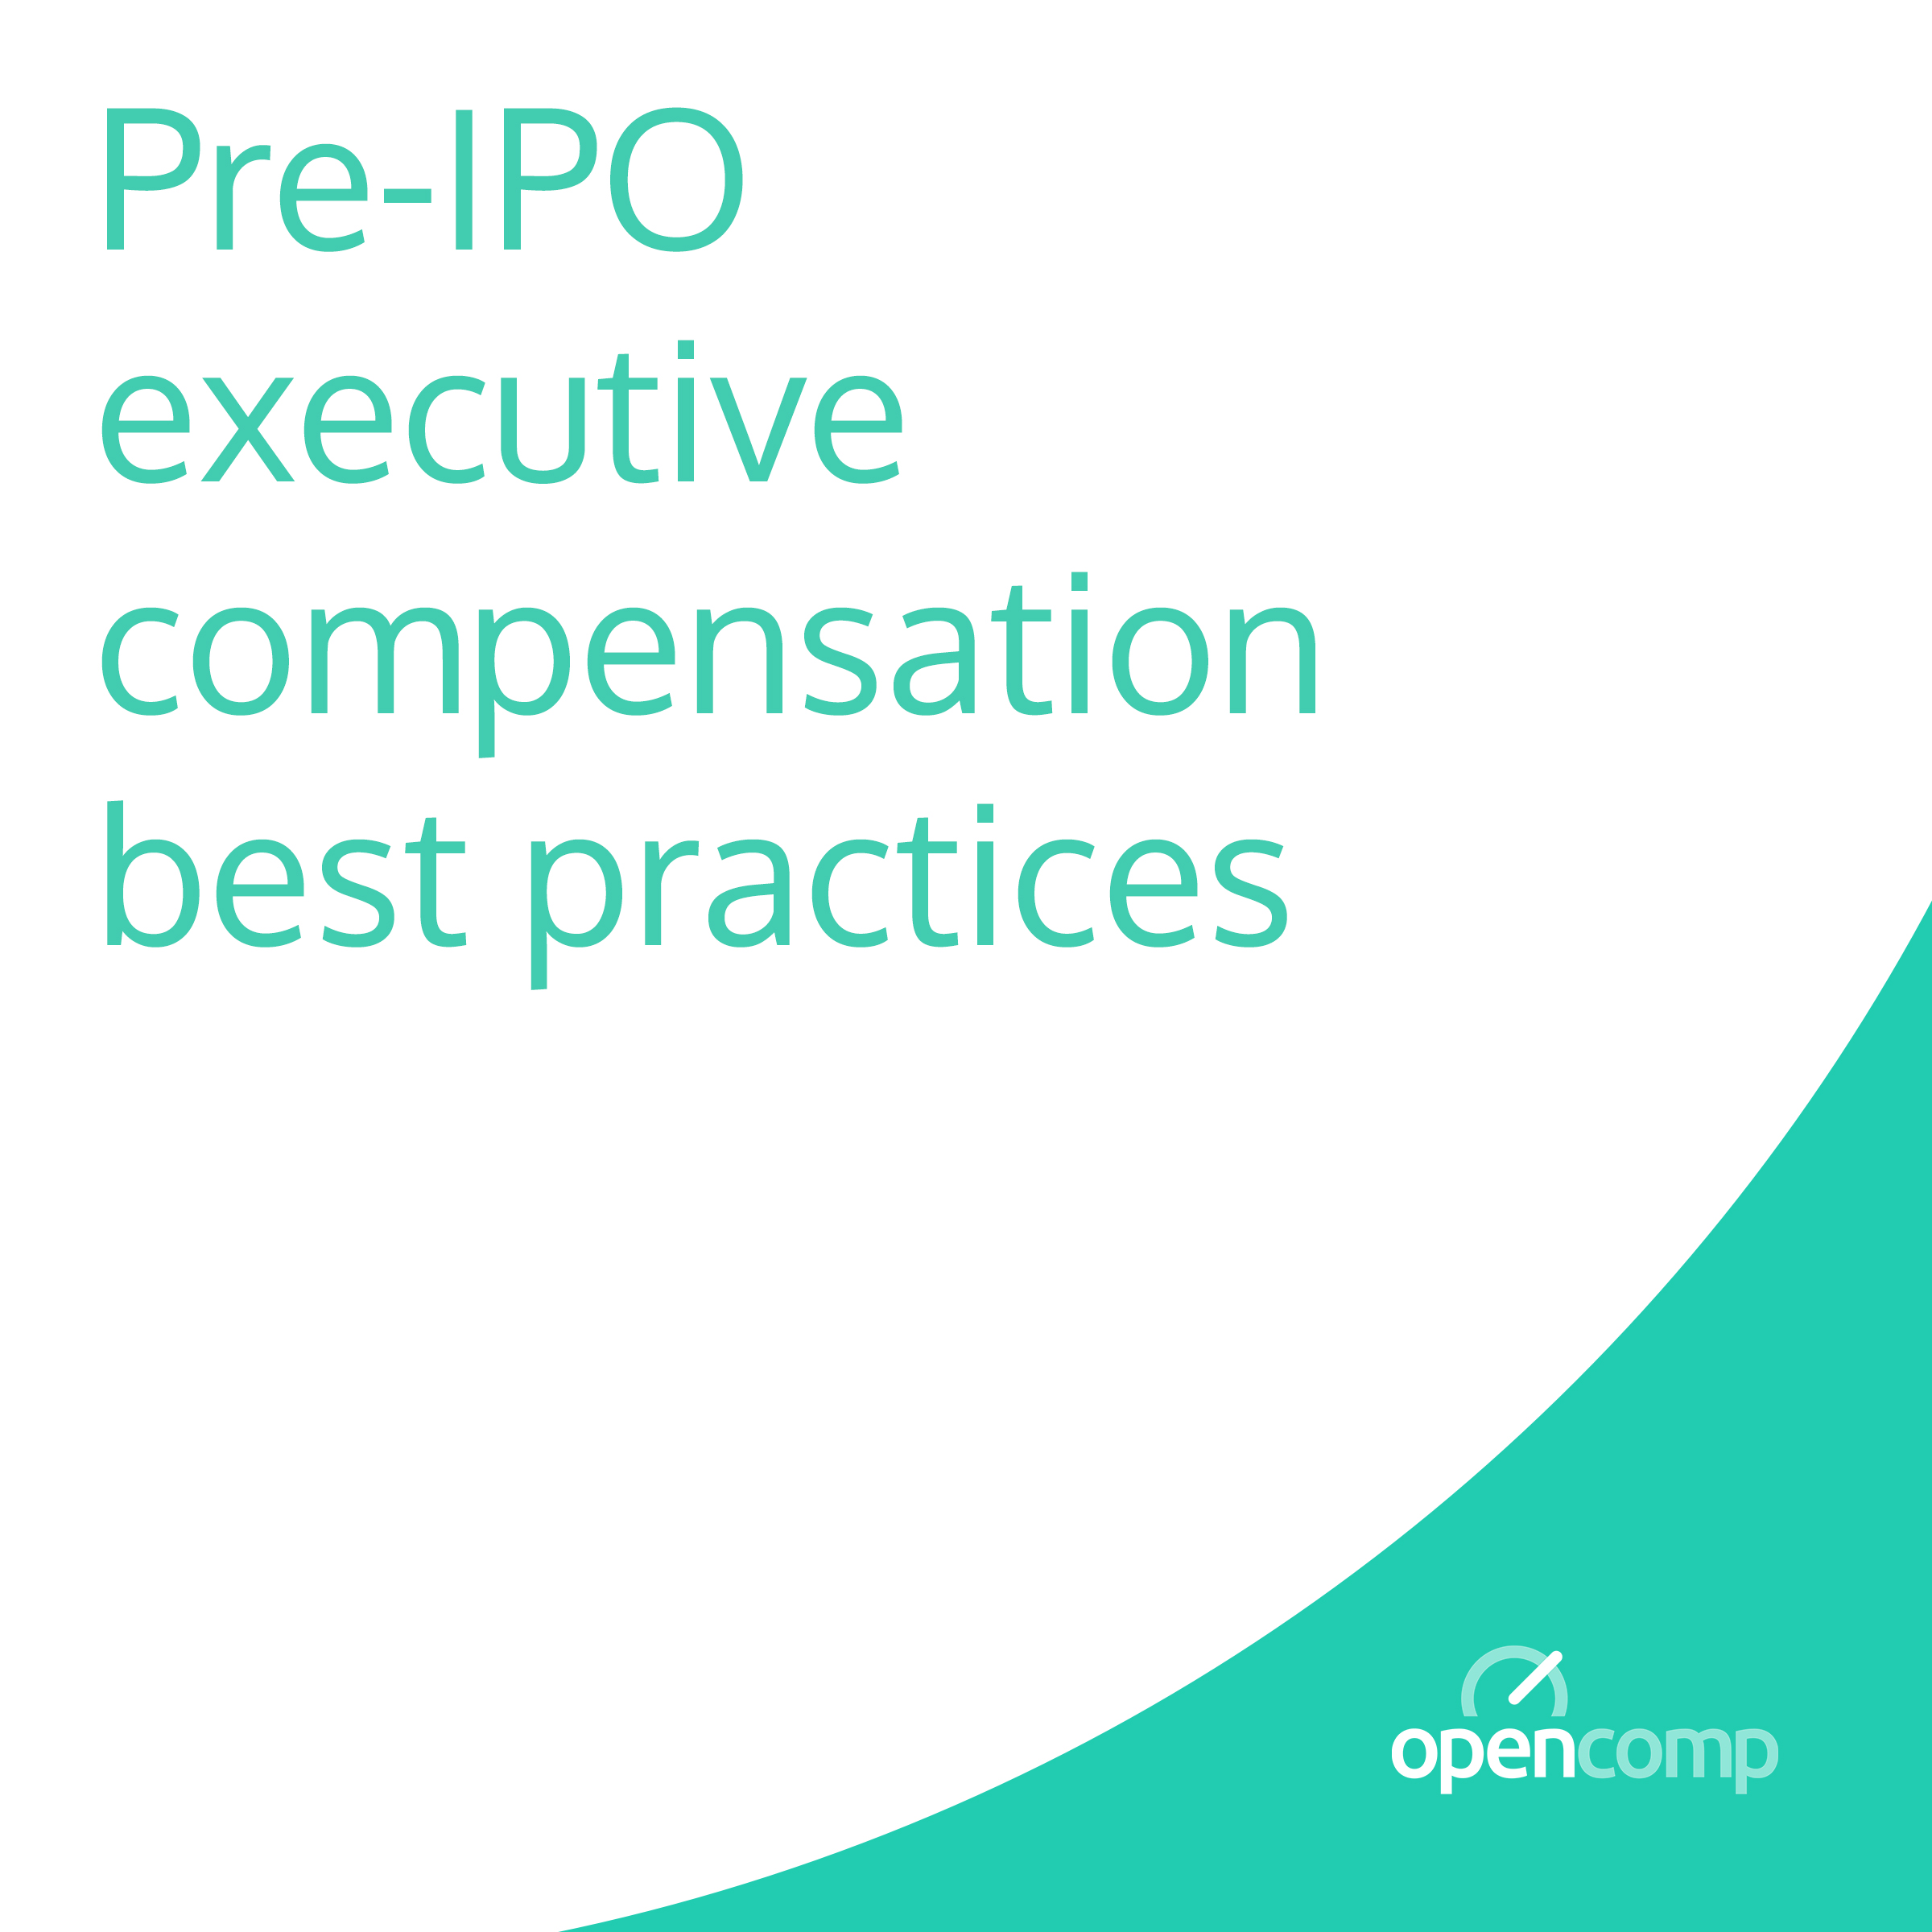 Executive Compensation Best Practices for Startups